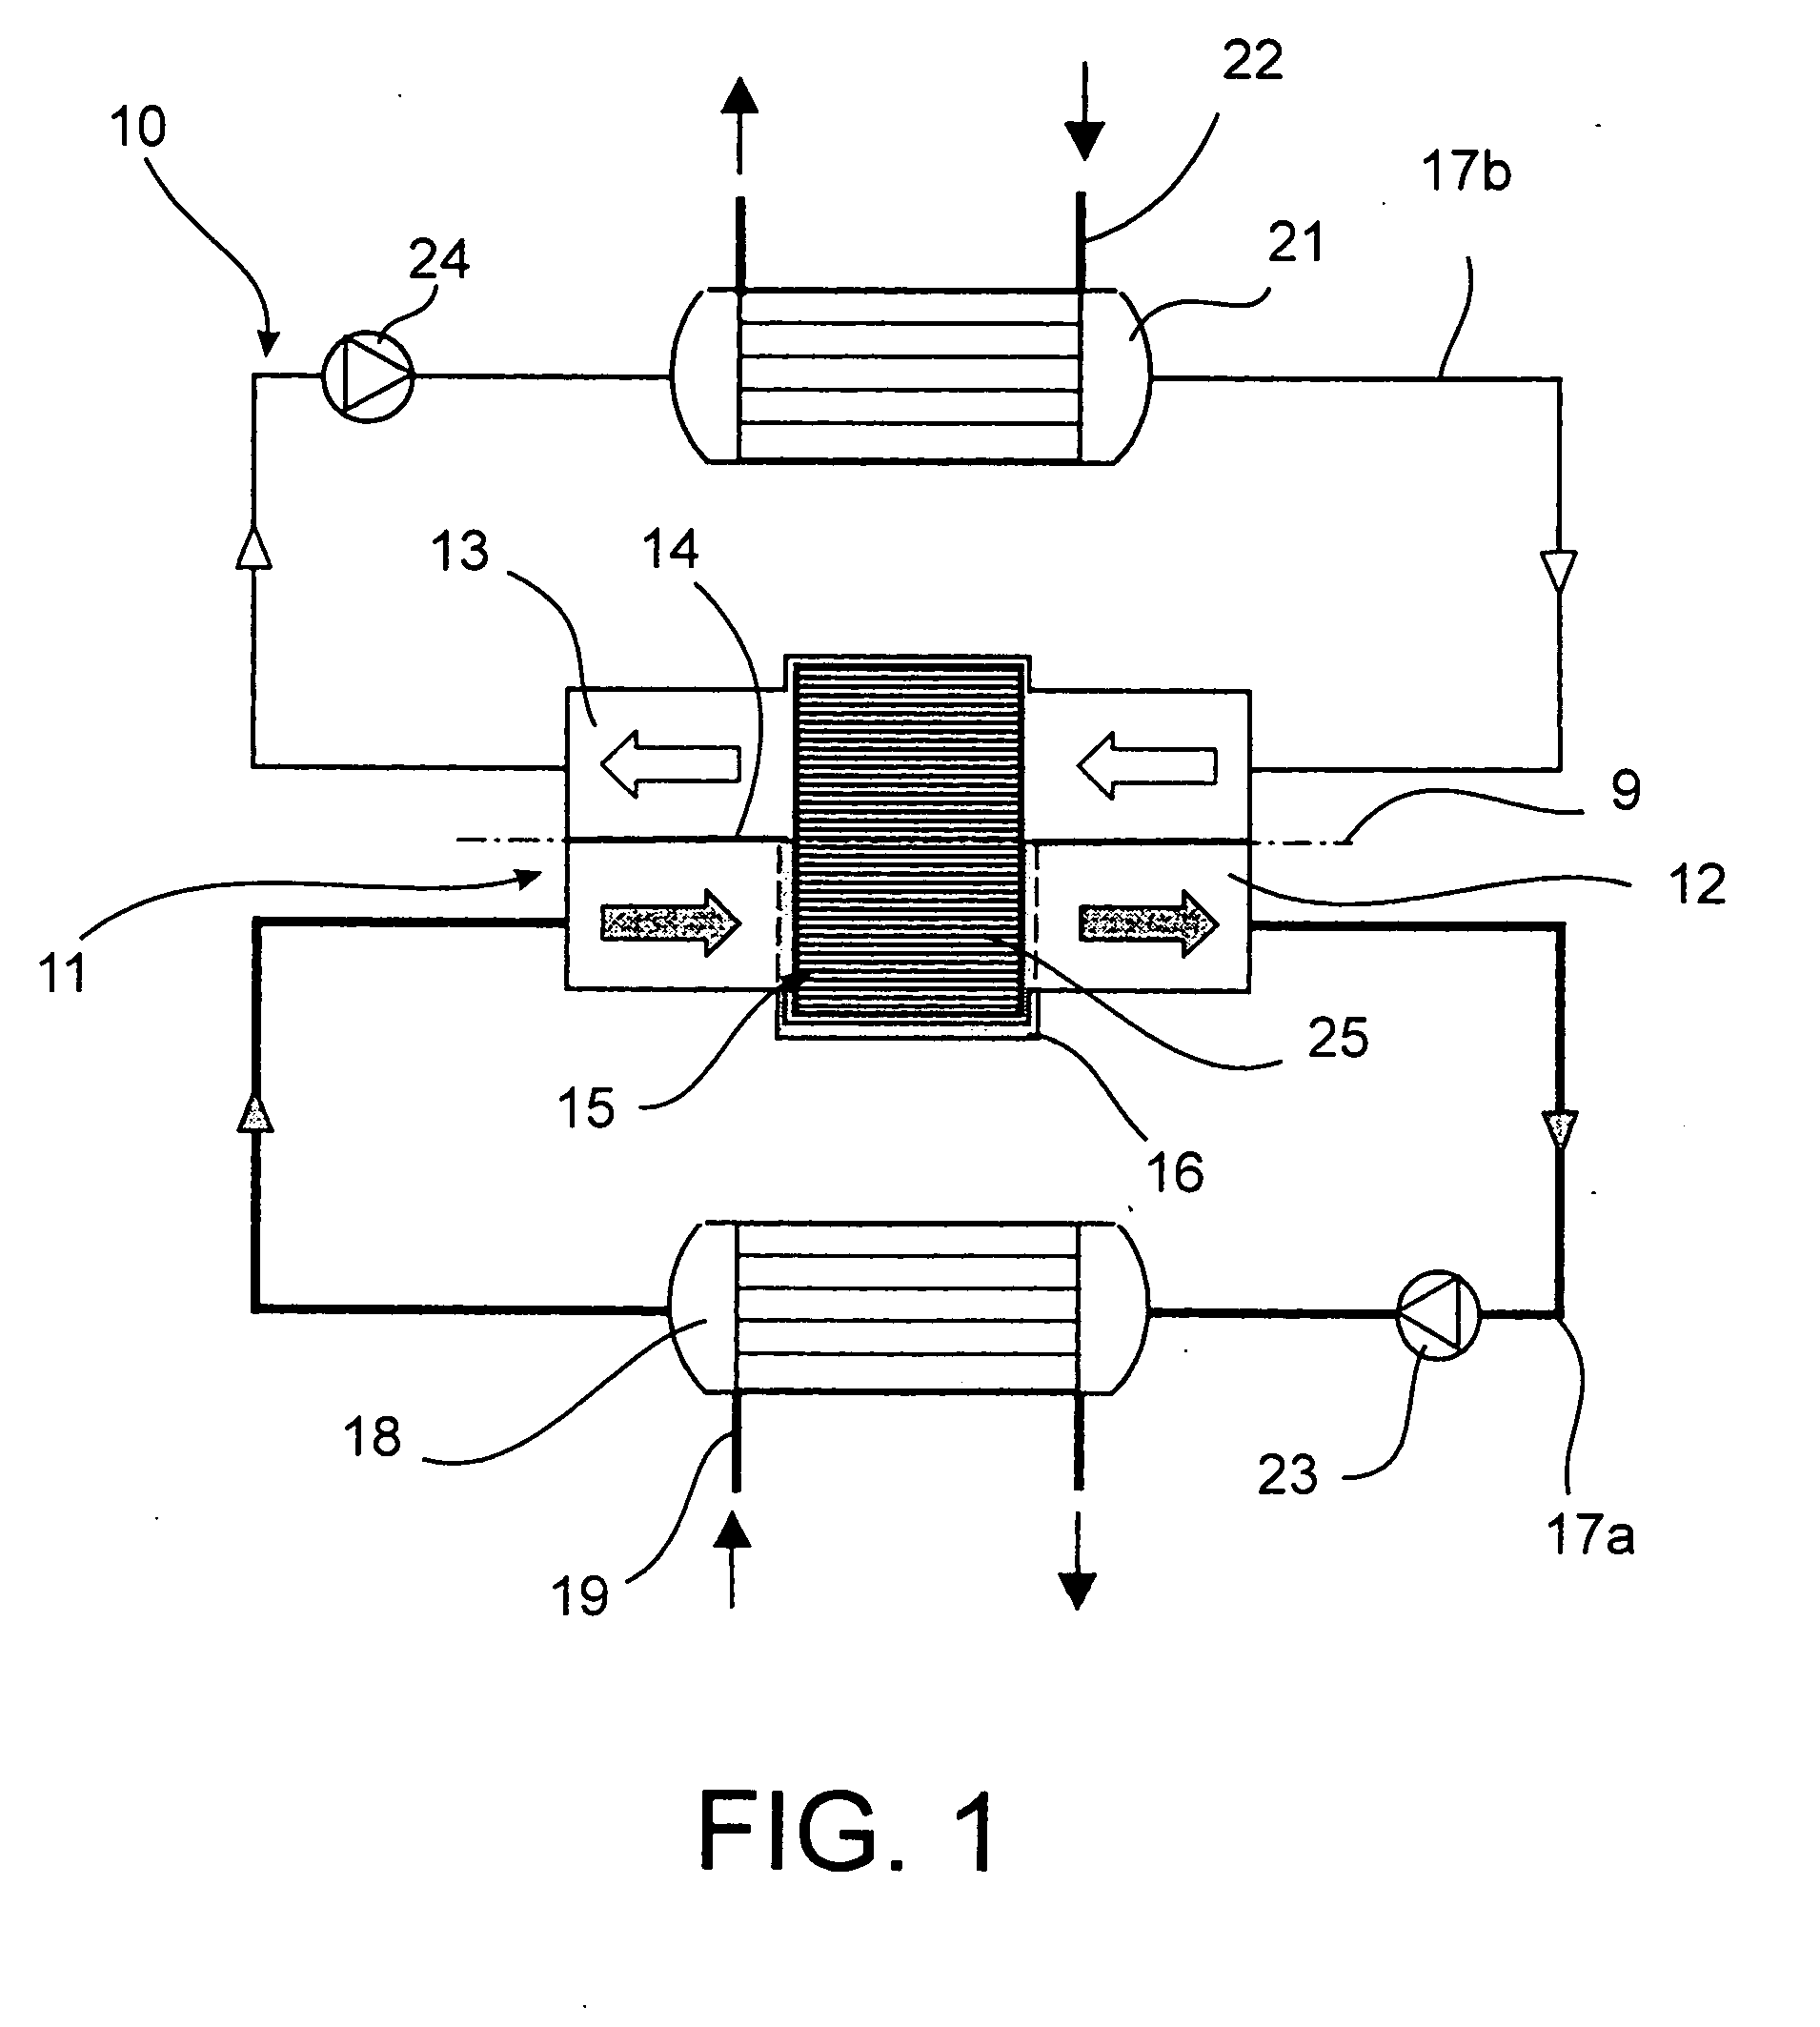 Method and device for continuous generation of cold and heat by means of the magneto-calorific effect